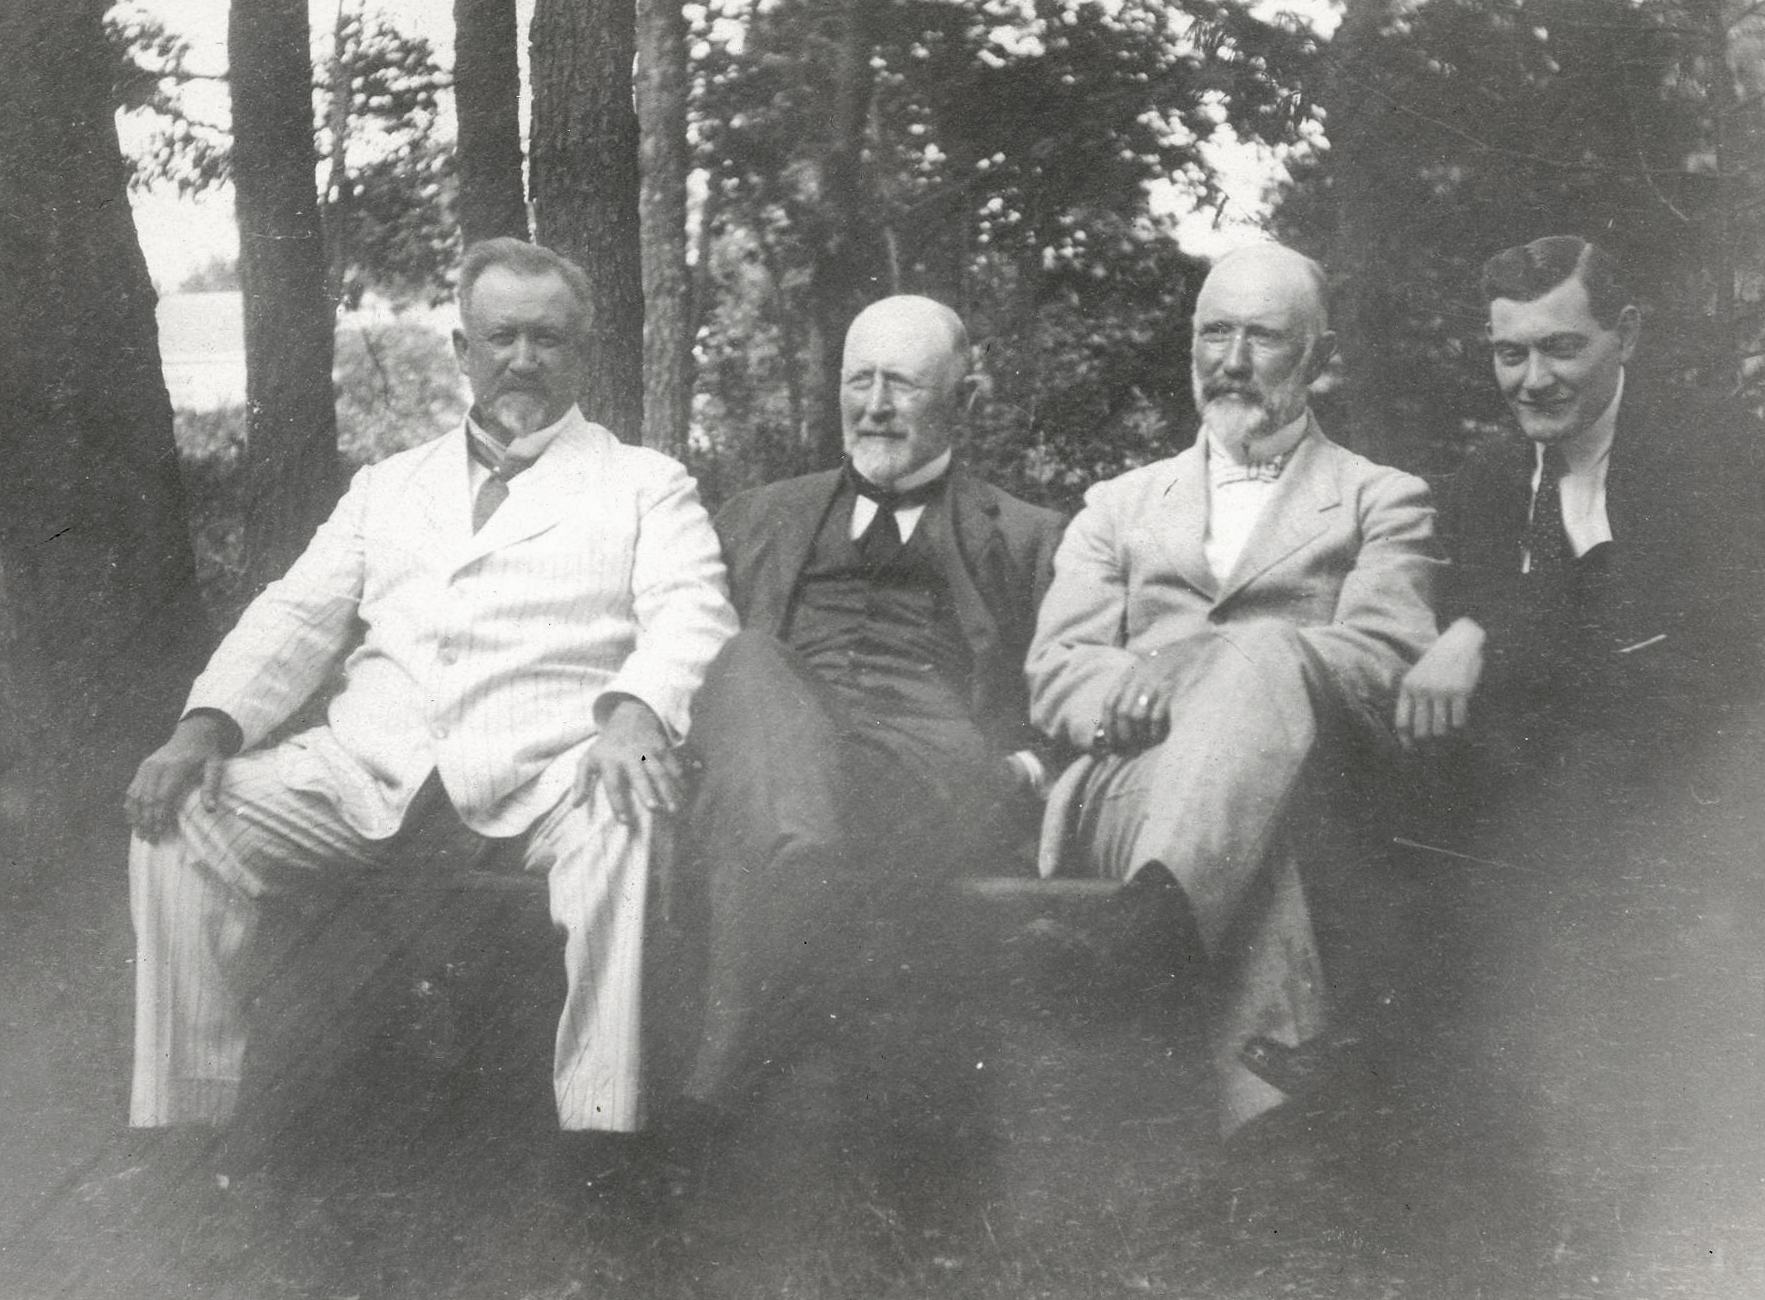 4 men sitting on a bench in front of trees.